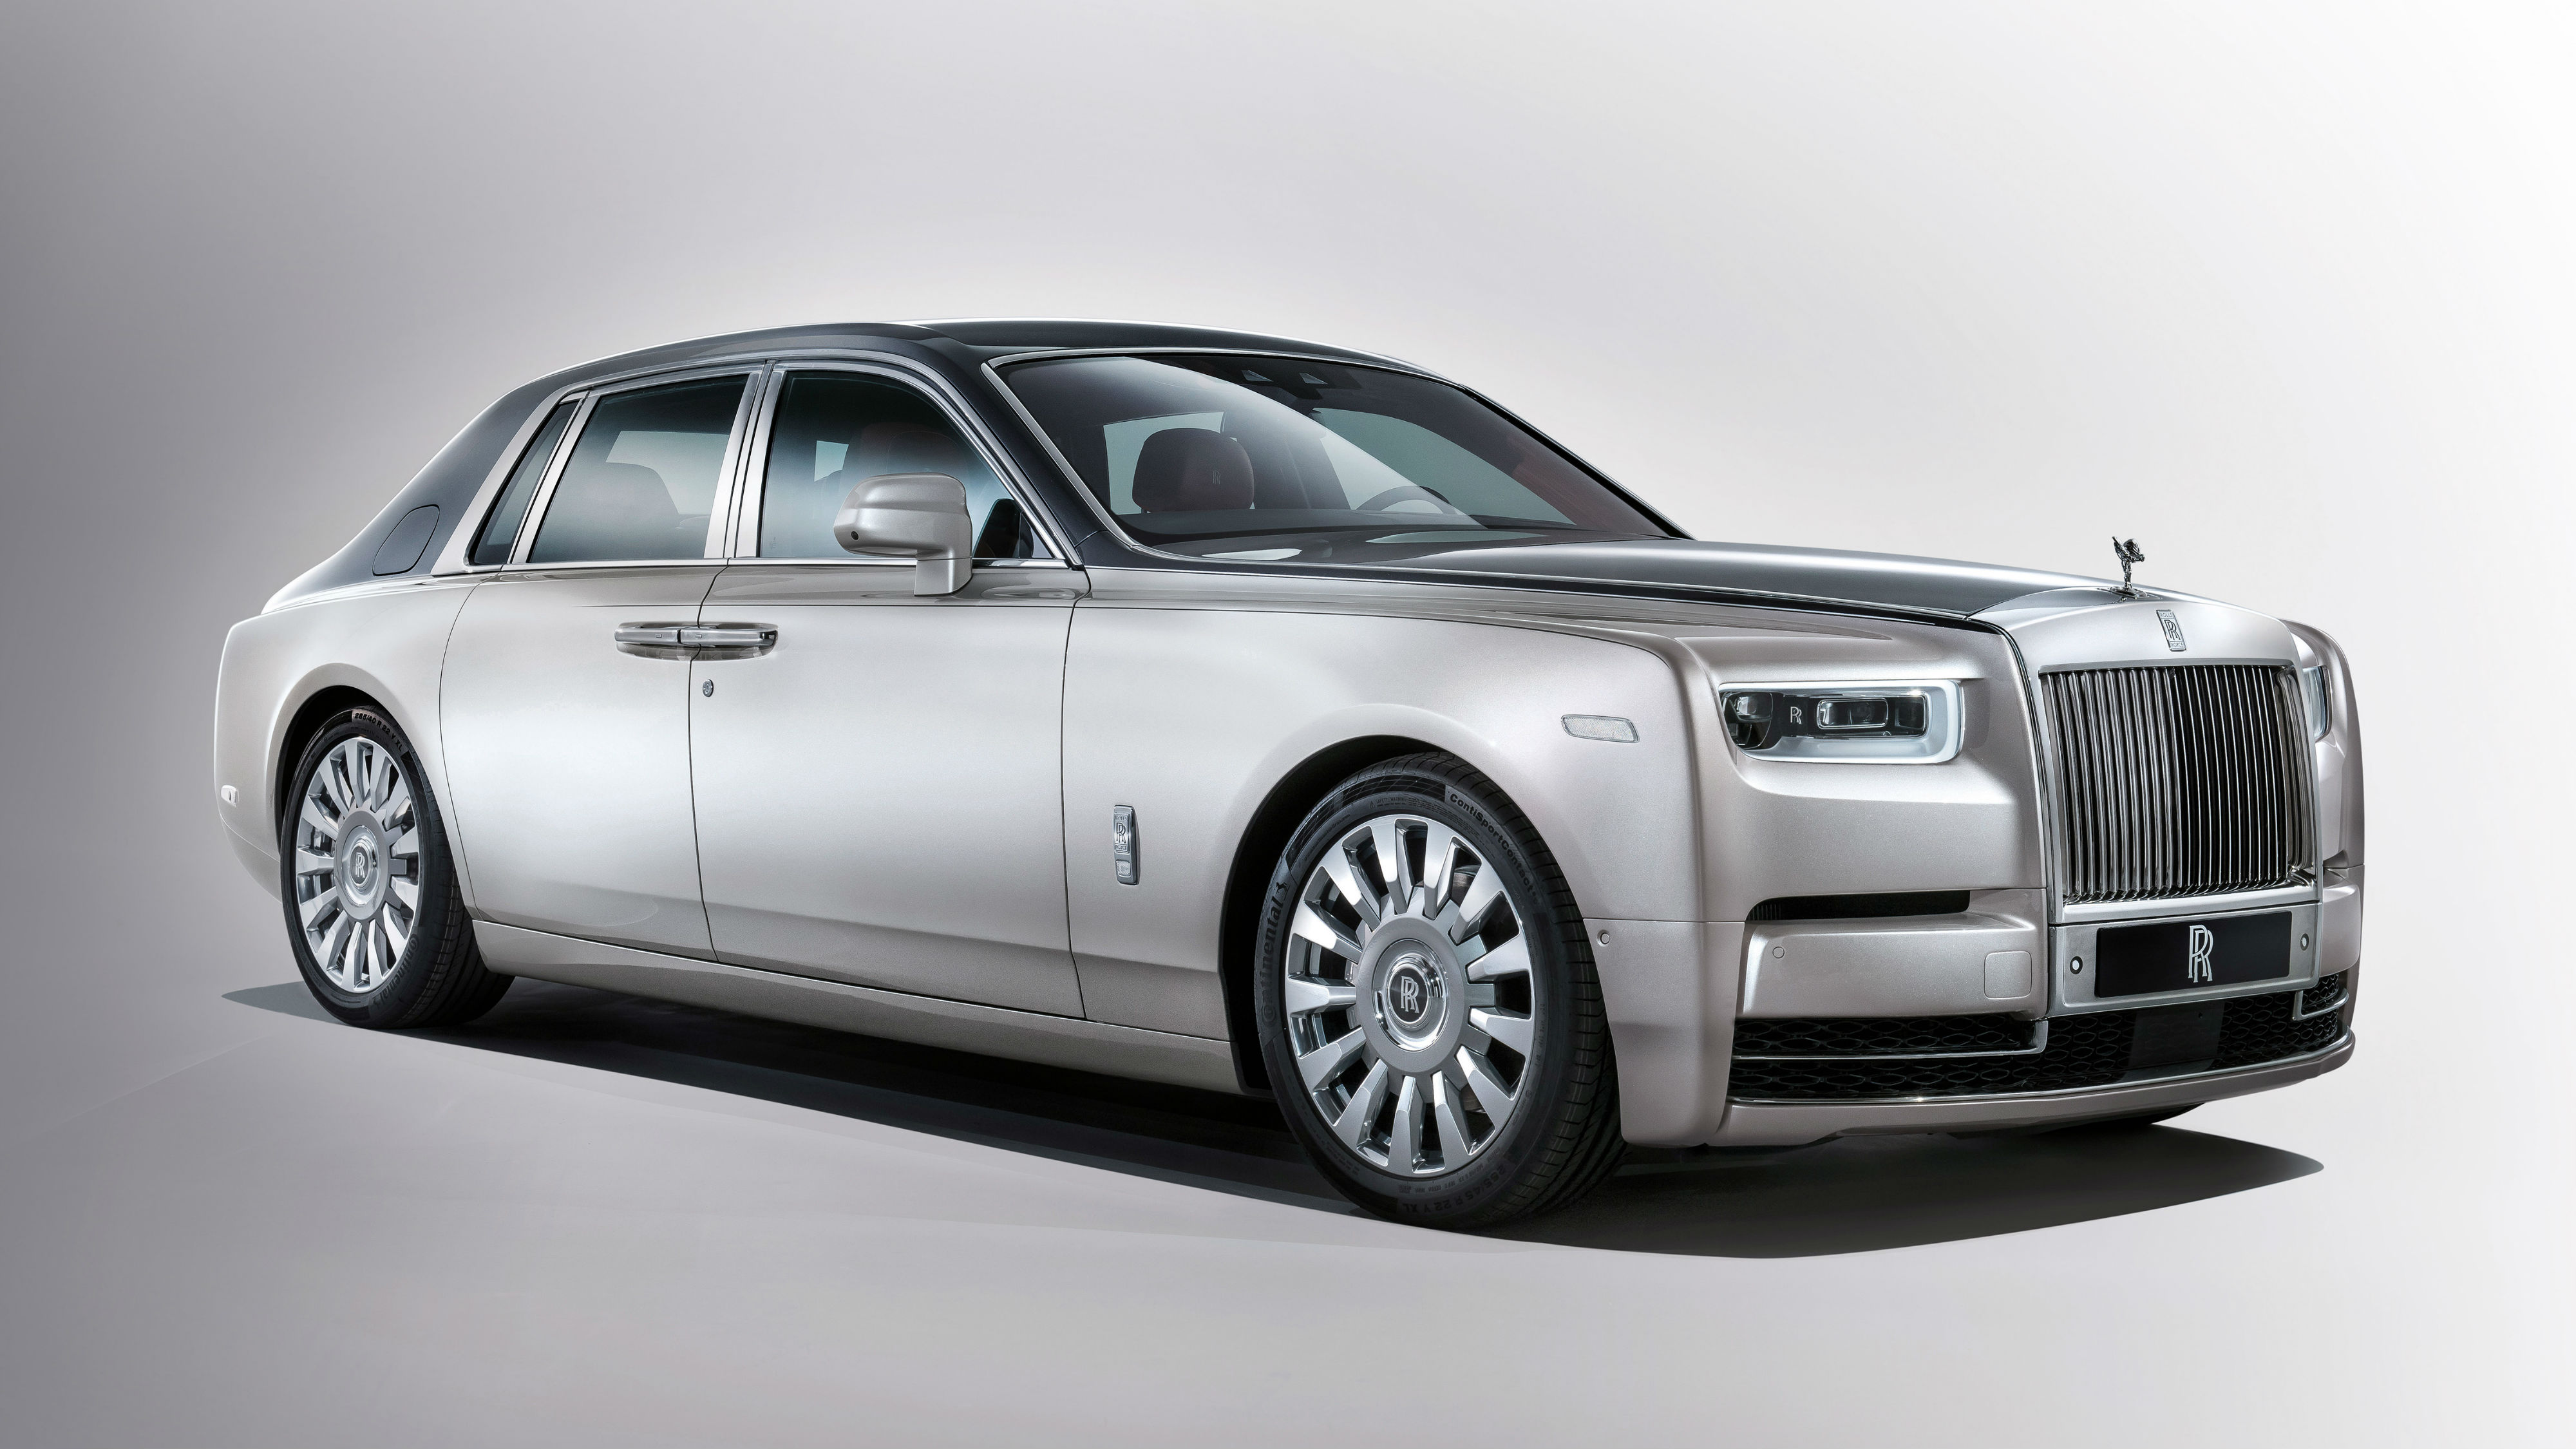 Rolls-Royce Ghost Extended adds more legroom without you knowing